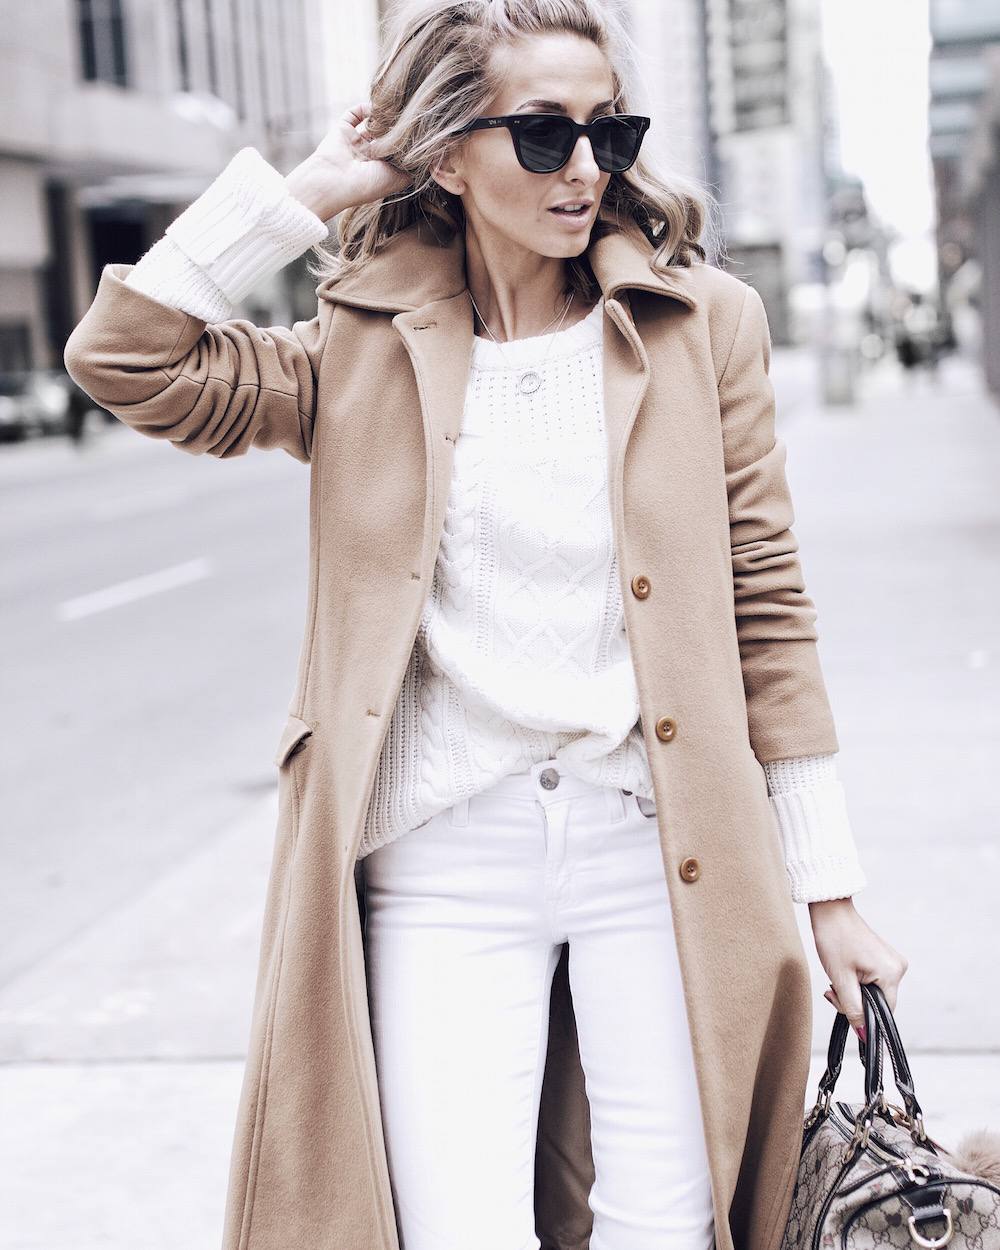 camel coat outfit ideas